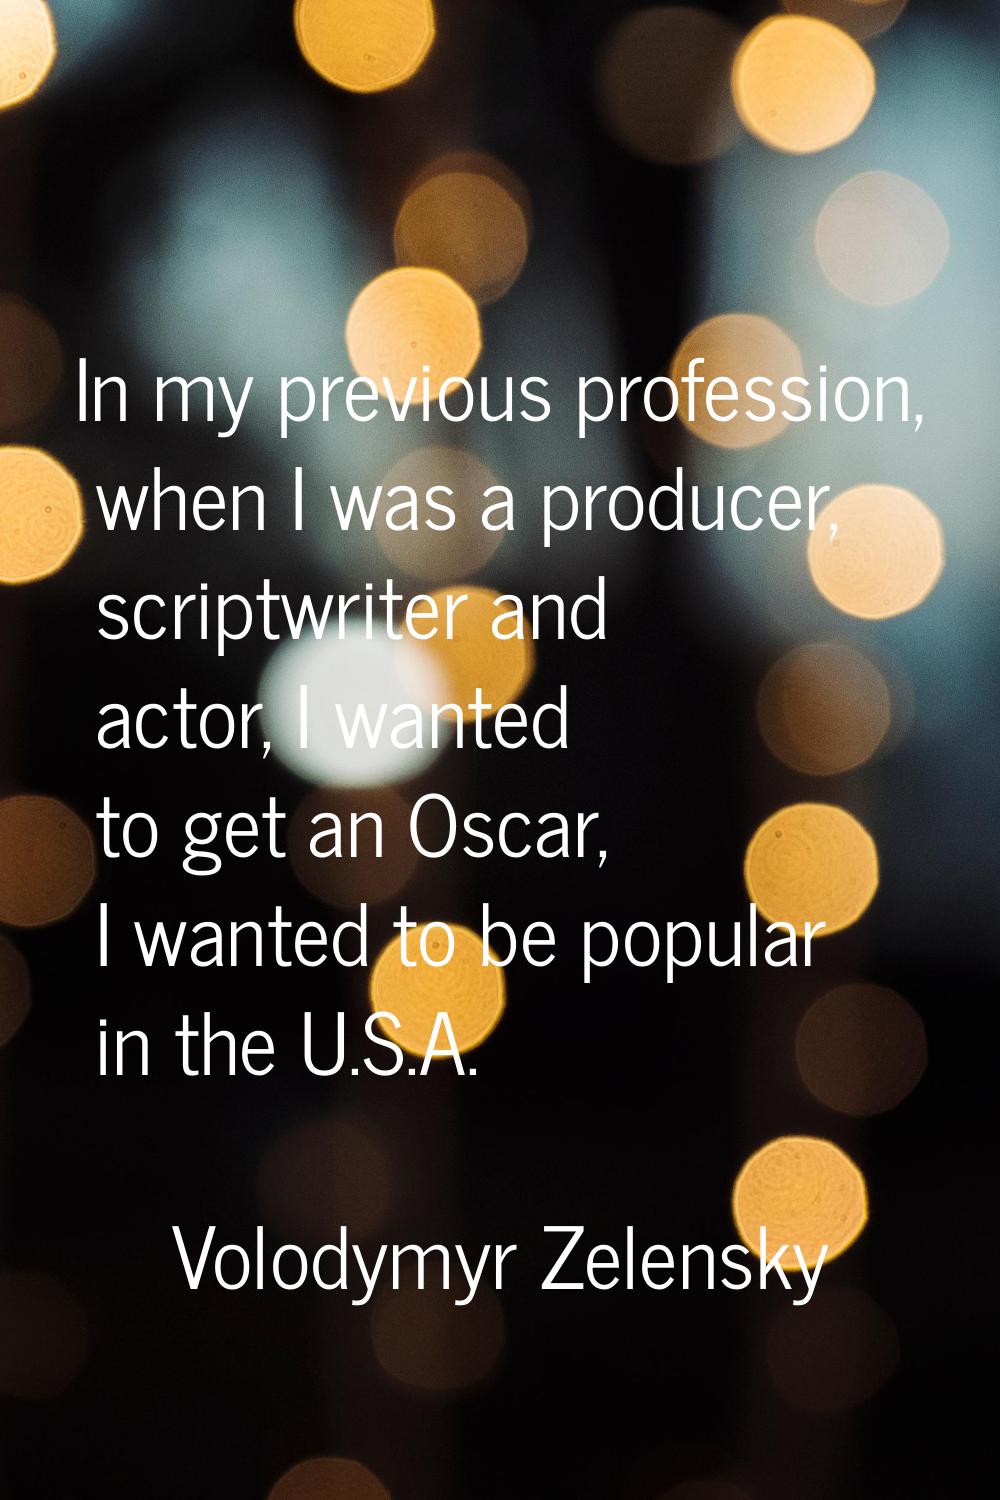 In my previous profession, when I was a producer, scriptwriter and actor, I wanted to get an Oscar,